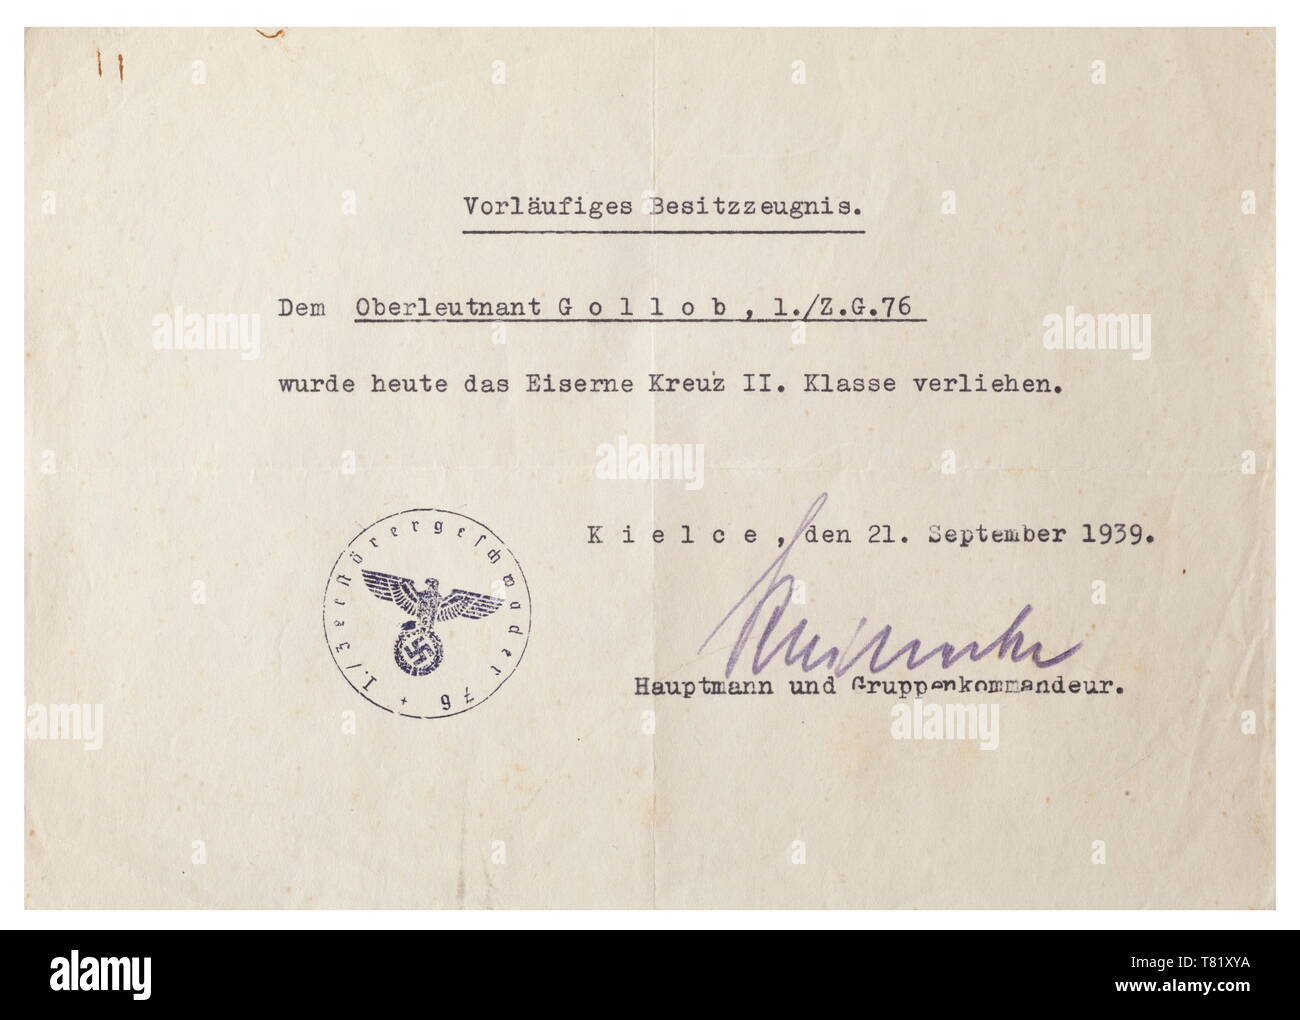 A preliminary possession document for the Iron Cross 2nd Class to Oberleutnant Gollob in Squadron 1, Destroyer Wing 76, dated 21 September 1939 with original signature of Hauptmann (captain) and group commander Günther Reinecke. historic, historical, Air Force, branch of service, branches of service, armed service, armed services, military, militaria, air forces, object, objects, stills, clipping, clippings, cut out, cut-out, cut-outs, 20th century, Editorial-Use-Only Stock Photo